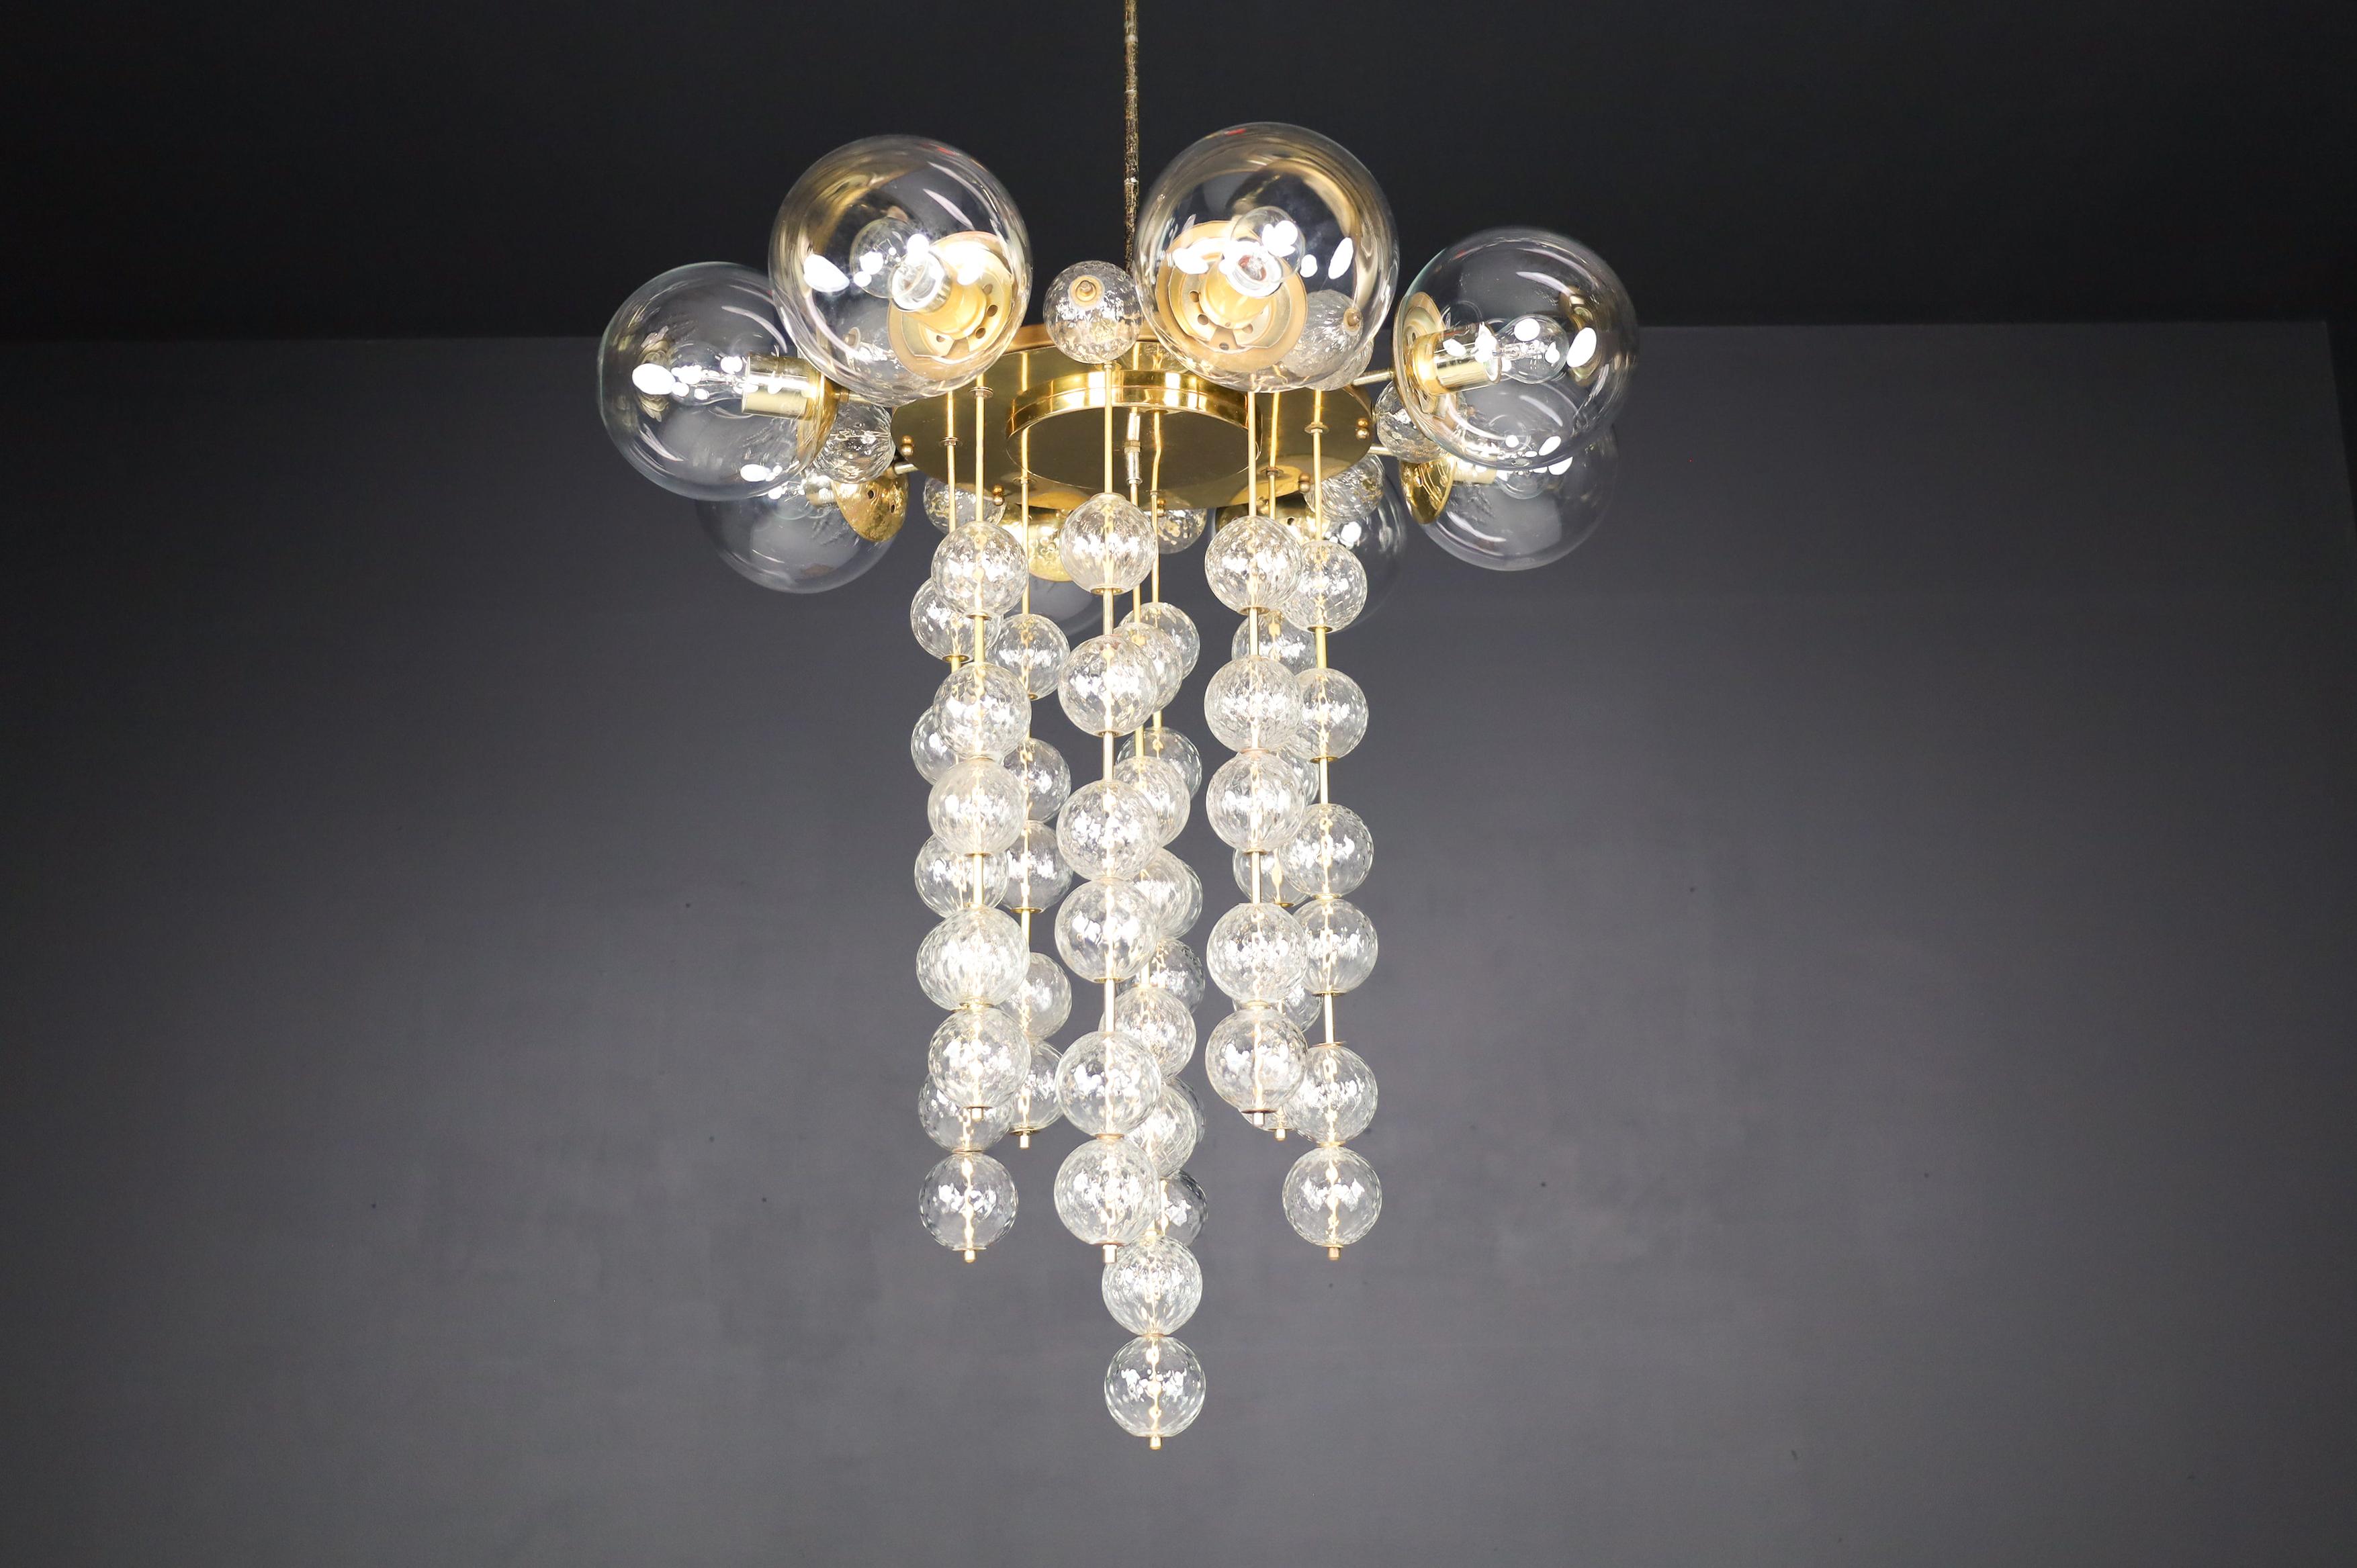 Czech Grand Chandelier with Brass Fixture and Hand-blowed Glass Globes, 1960s For Sale